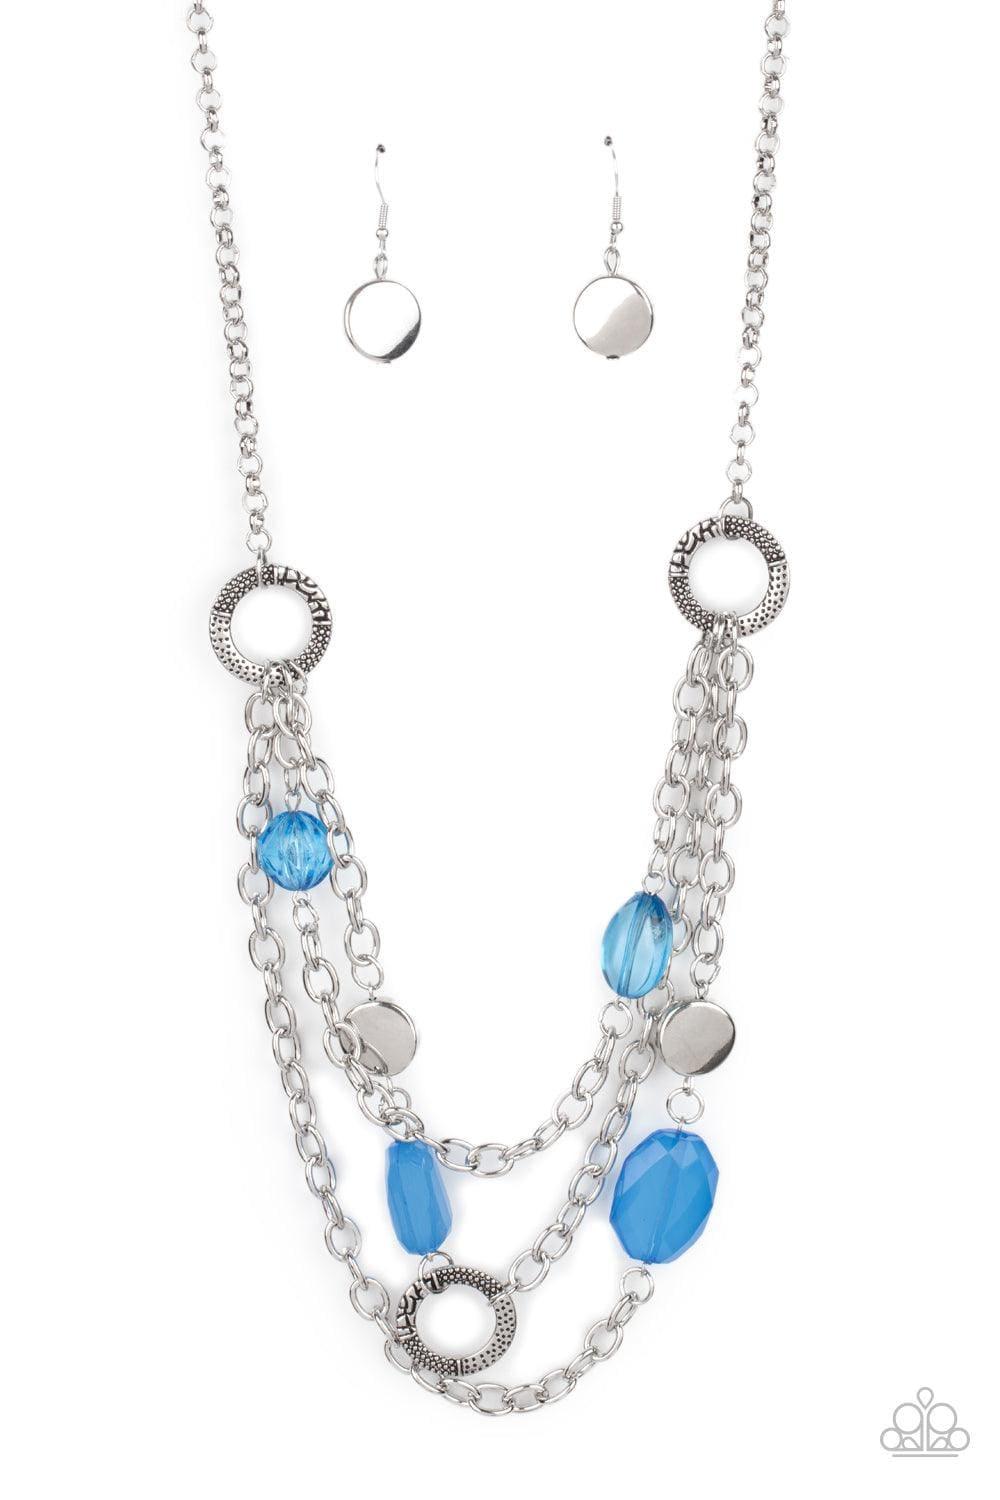 Paparazzi Accessories - Oceanside Spa - Blue Necklace - Bling by JessieK